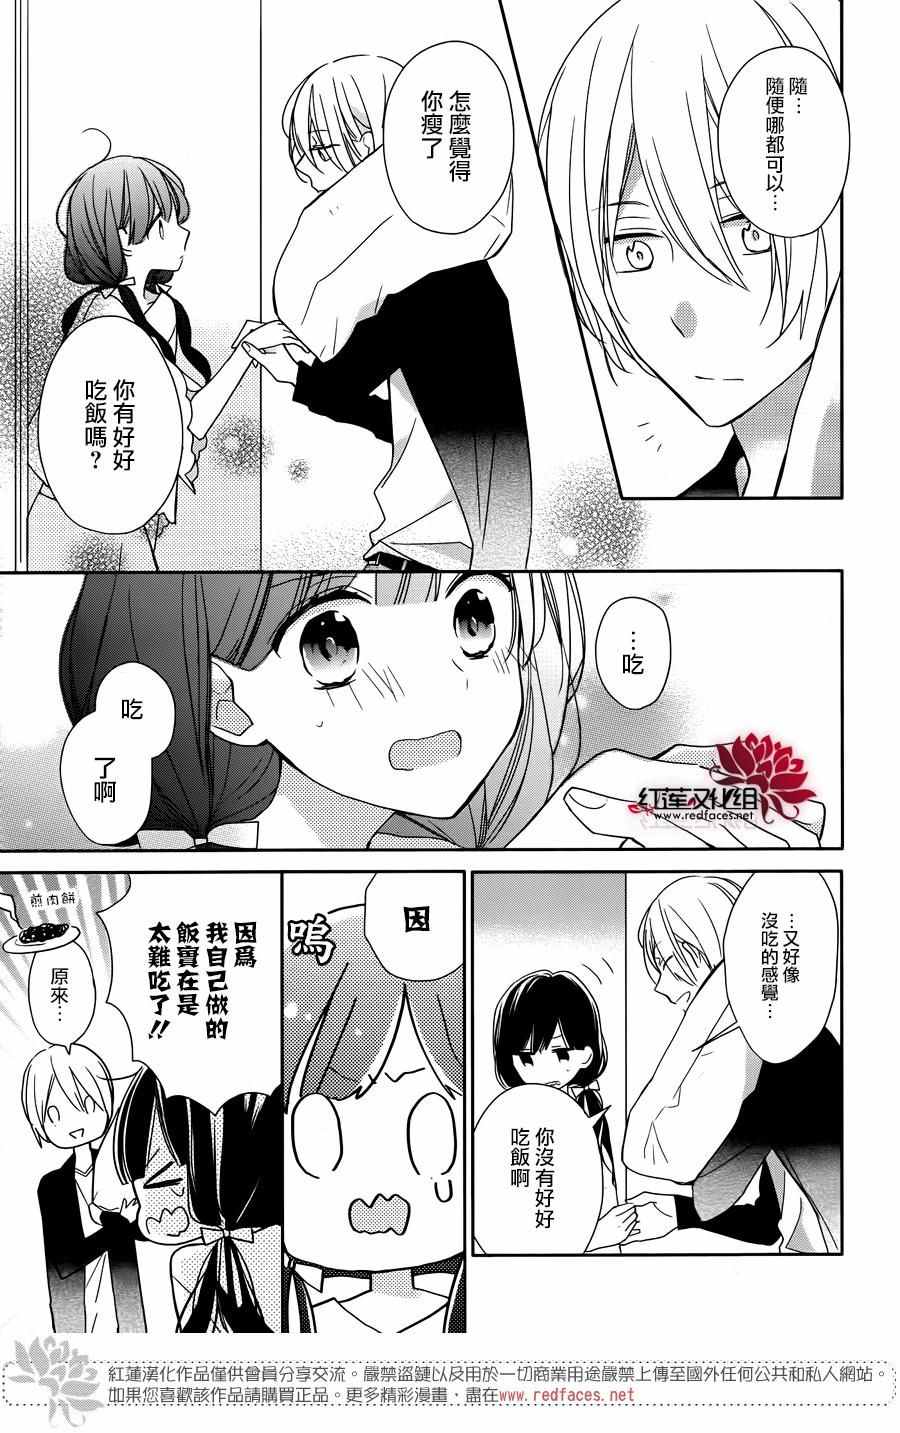 《If given a second chance》漫画 second chance 002话